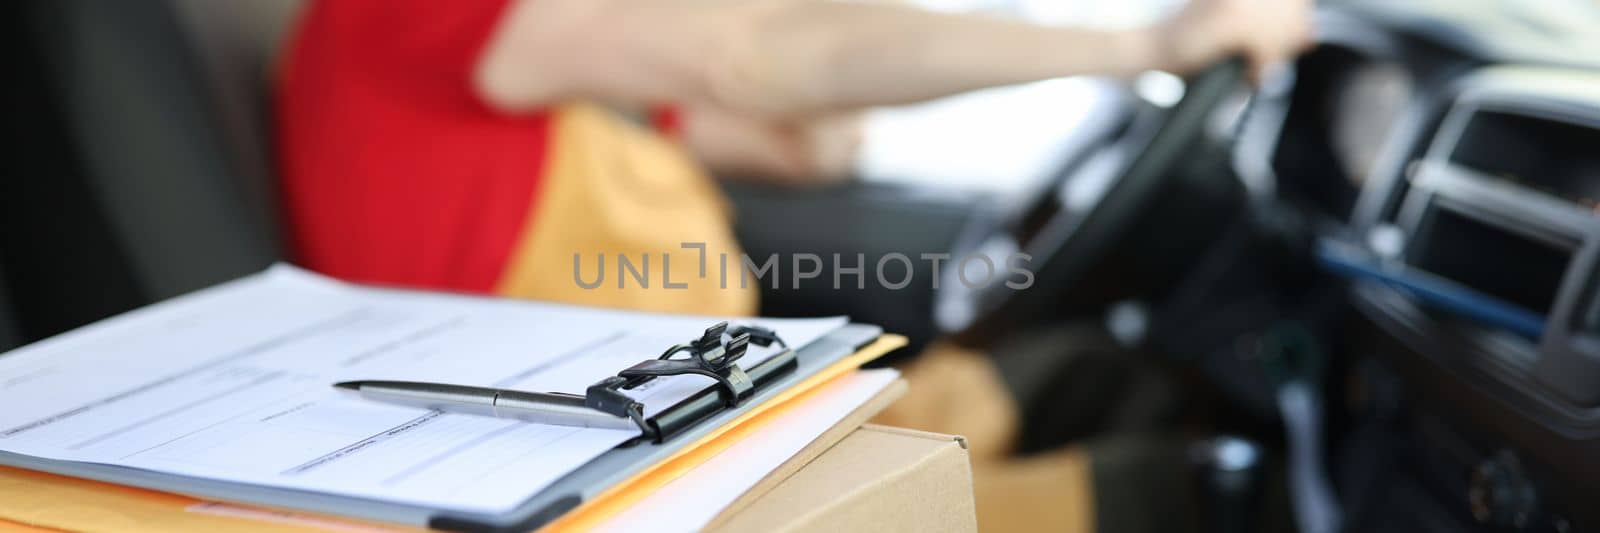 Courier in uniform in car and receipt documents on clipboard for client. Parcel delivery and courier driver services